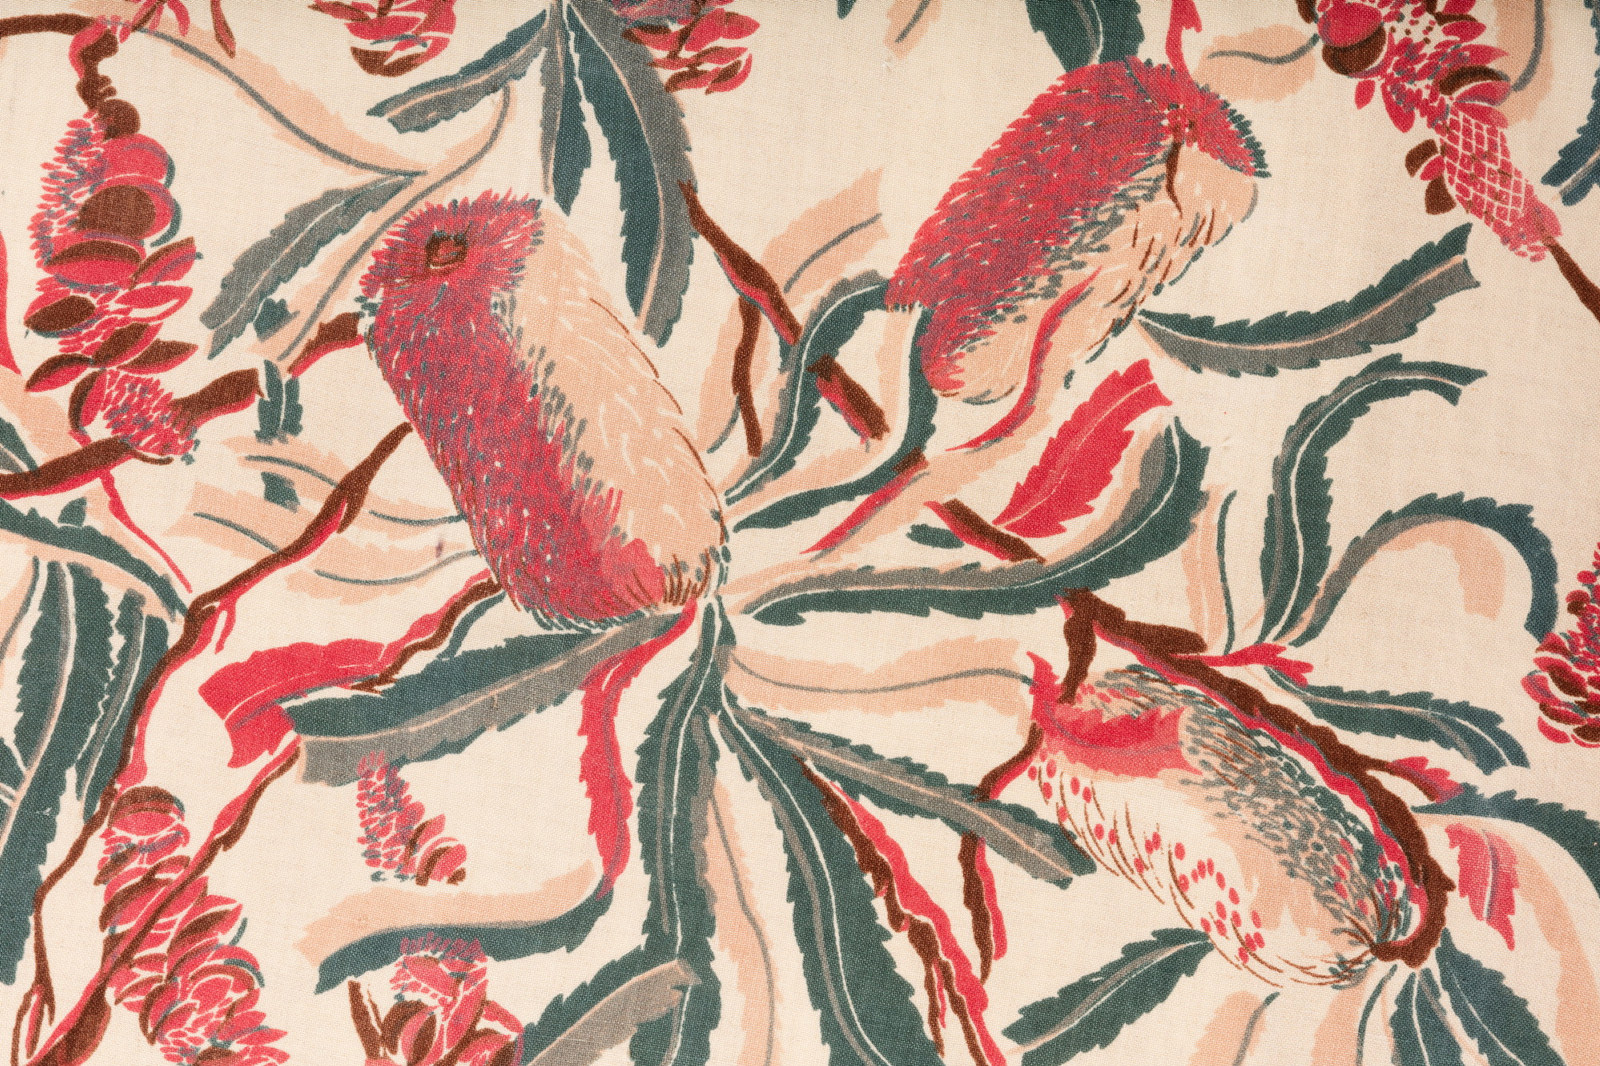 Curtain in ‘ Banksia ’ design (detail) by Nance Mackenzie and made by Annan Fabrics, Mosman NSW, circa late 1940s